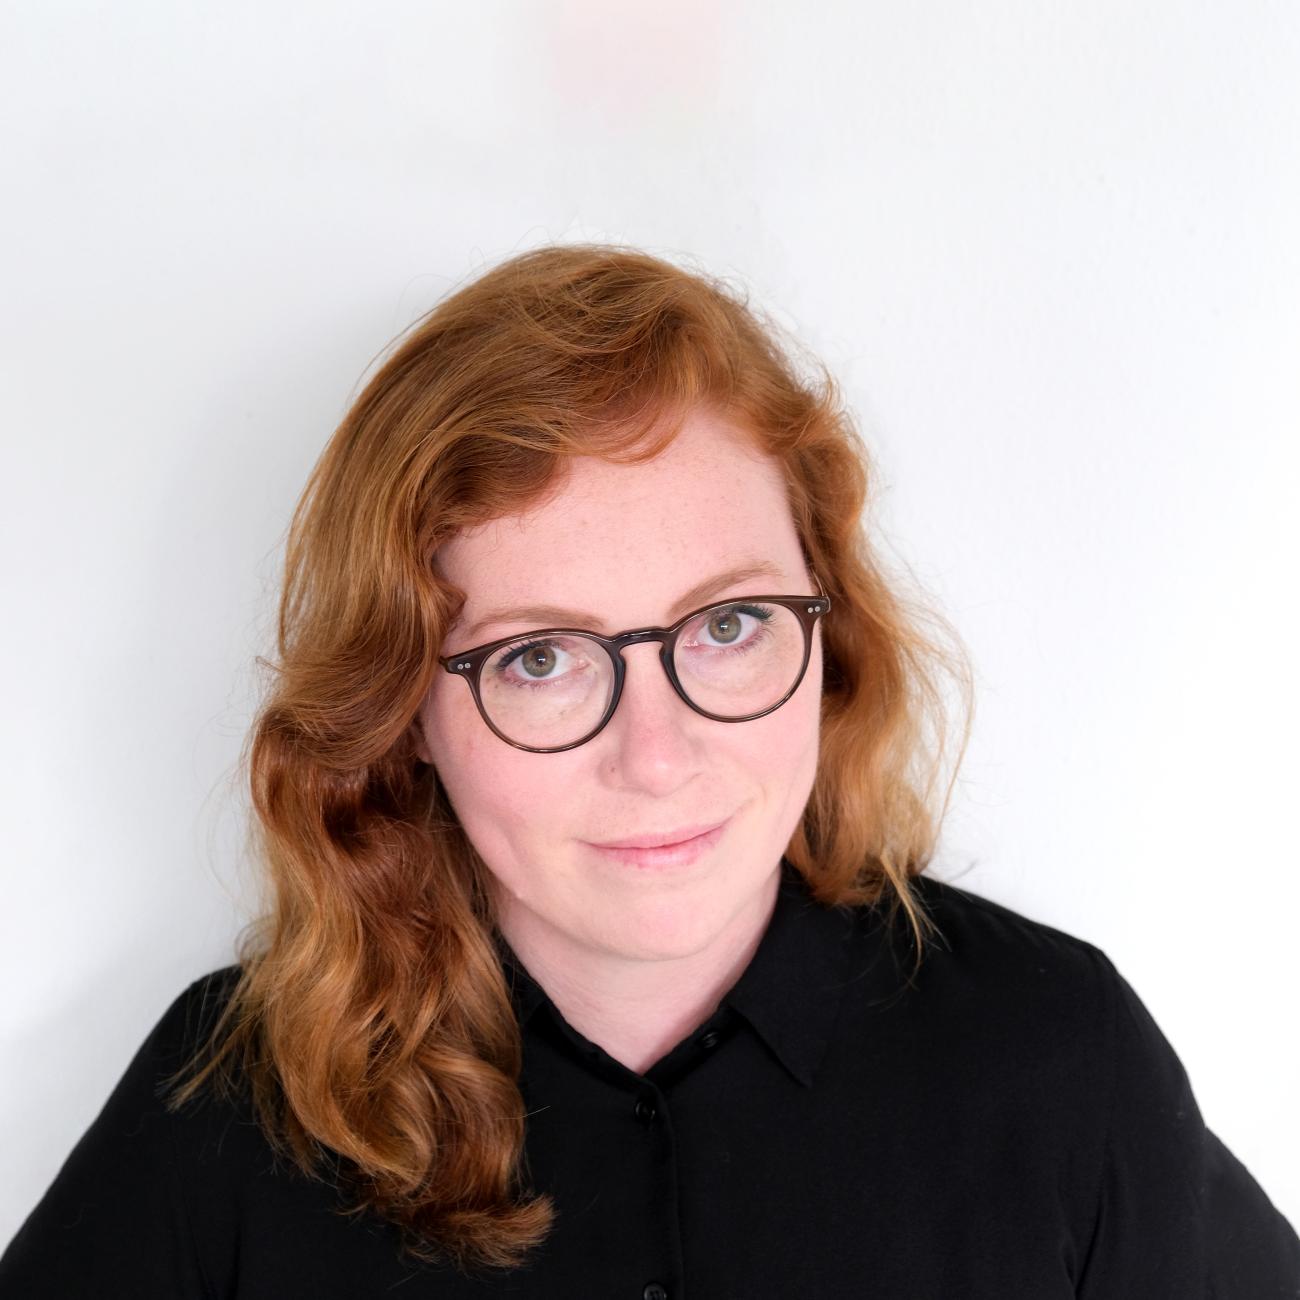 Image of a red-headed woman wearing wire rimmed glasses and a blue shirt